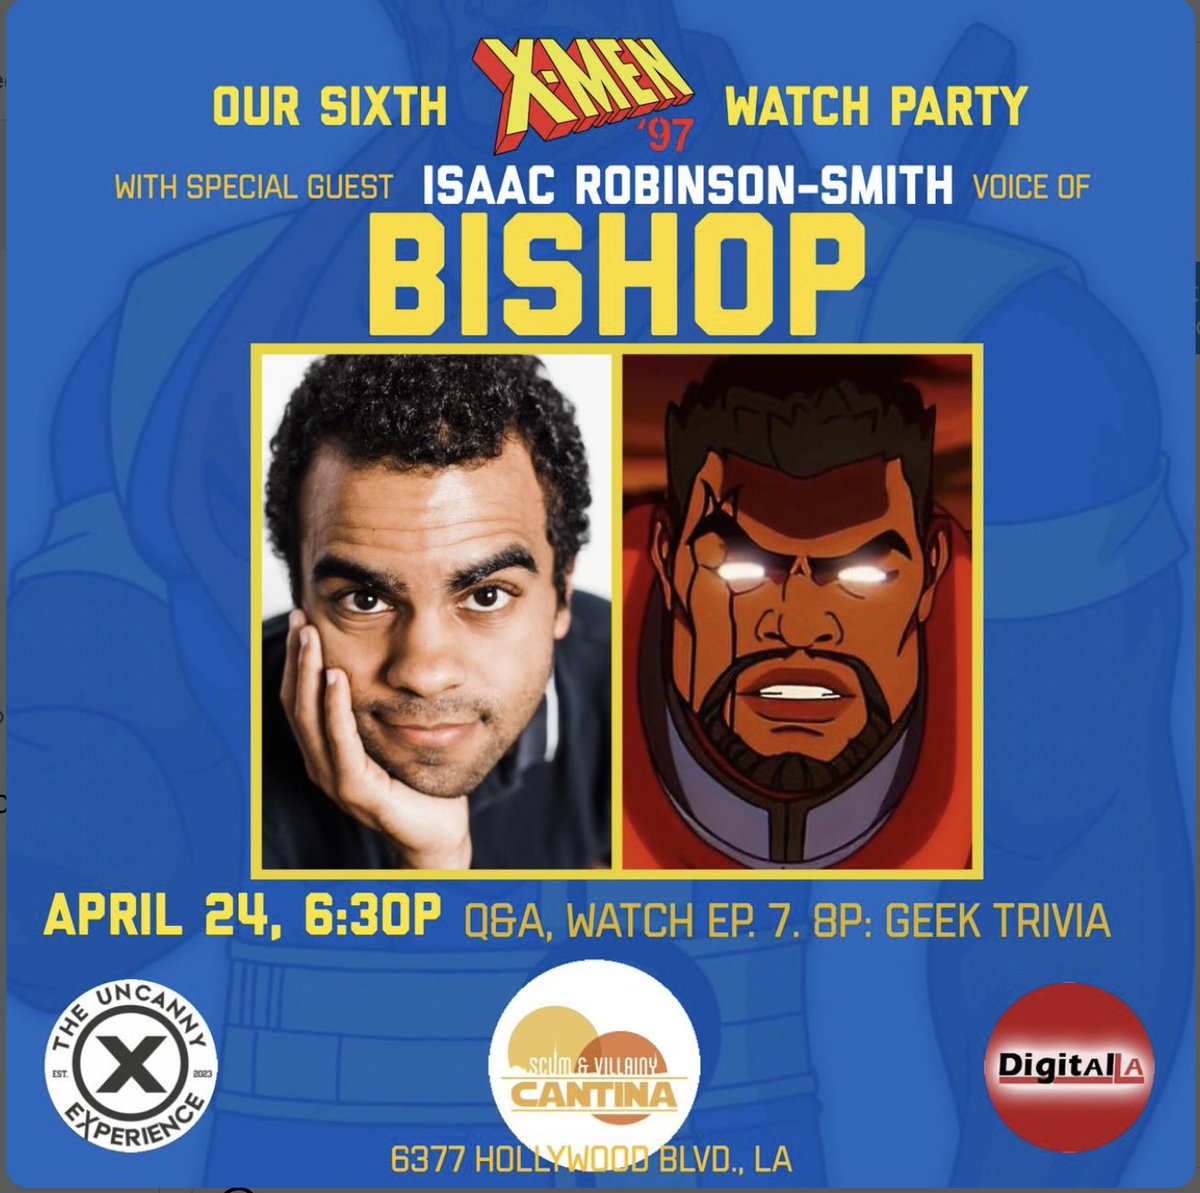 ❌ Join our watch party for the NEW X-Men ‘97 ep “Bright Eyes” @irsvoices aka Bishop this Wednesday at 6:30pm at @scumandvillainycantina in Hollywood with a Q&A! Cosplay and X-Men fan fashion encouraged. Presented by: @theuncannyexp & @digitalla See you there, mutants! 🎆